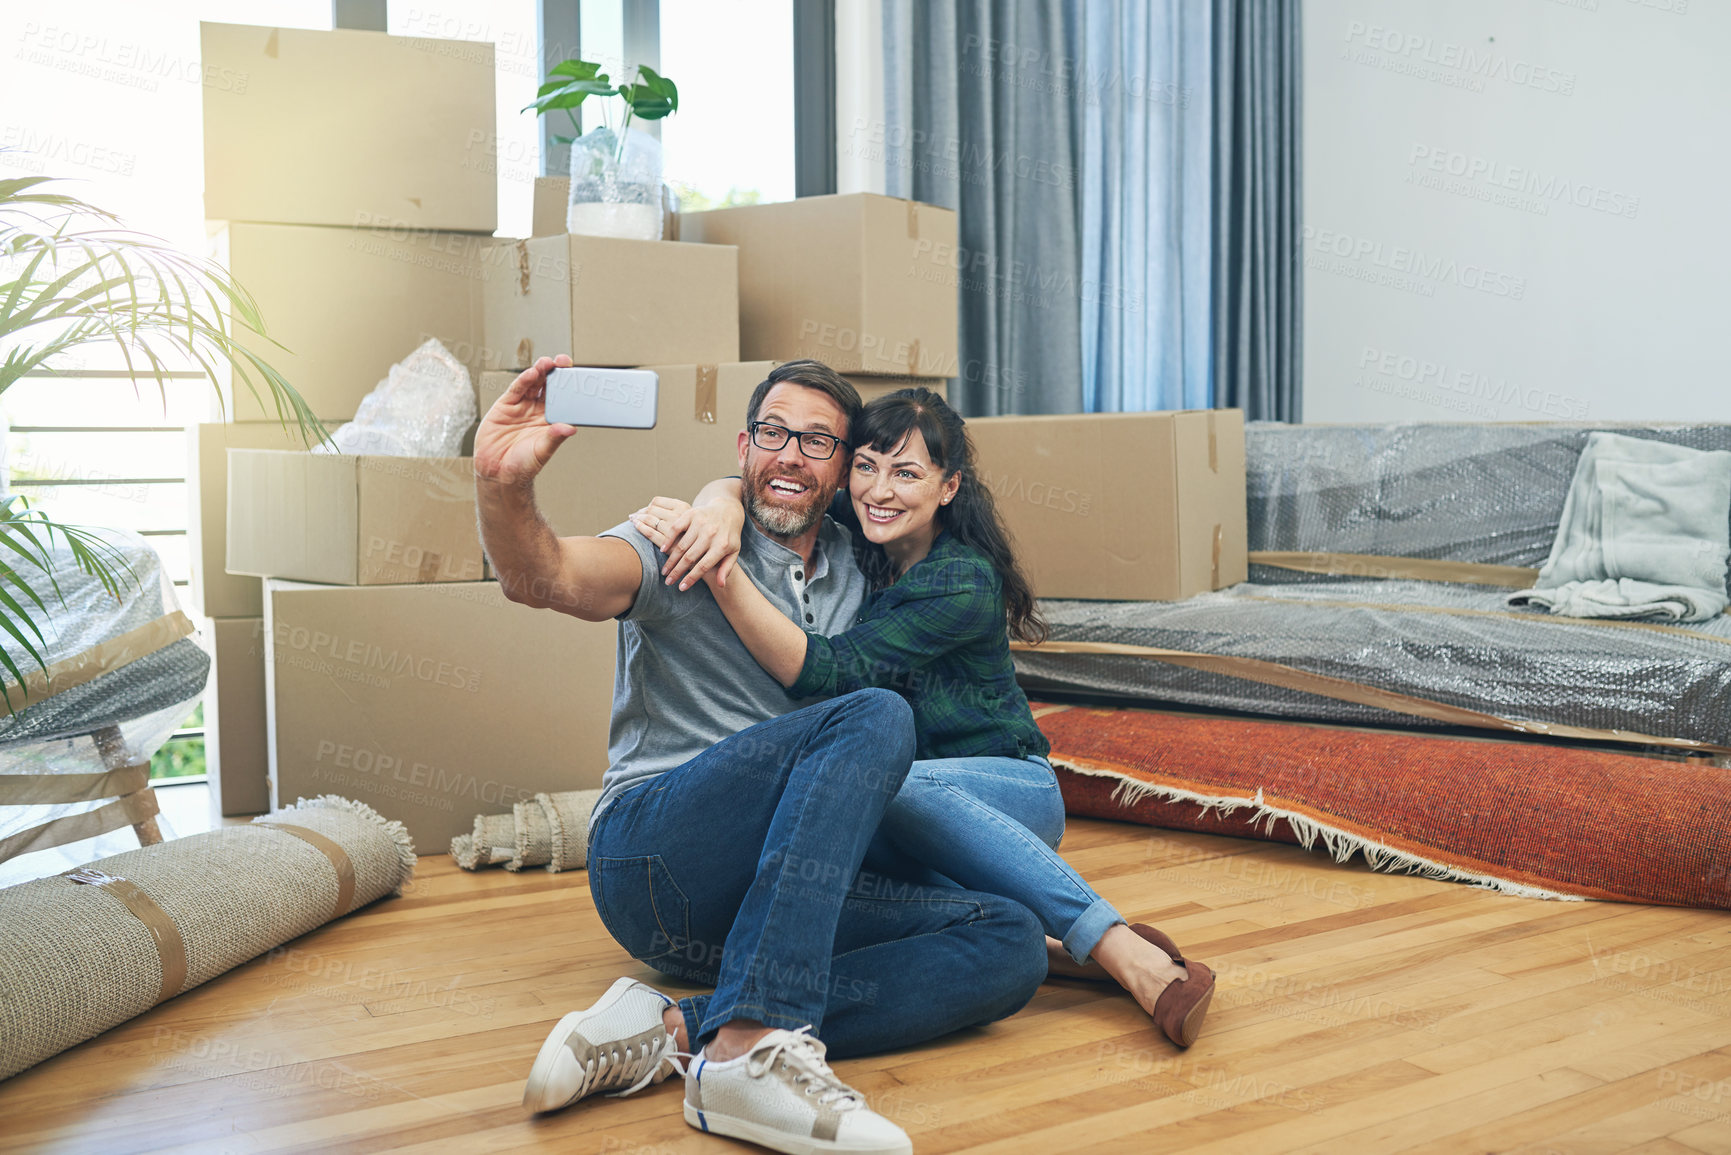 Buy stock photo Shot of a happy couple taking selfies together on moving day